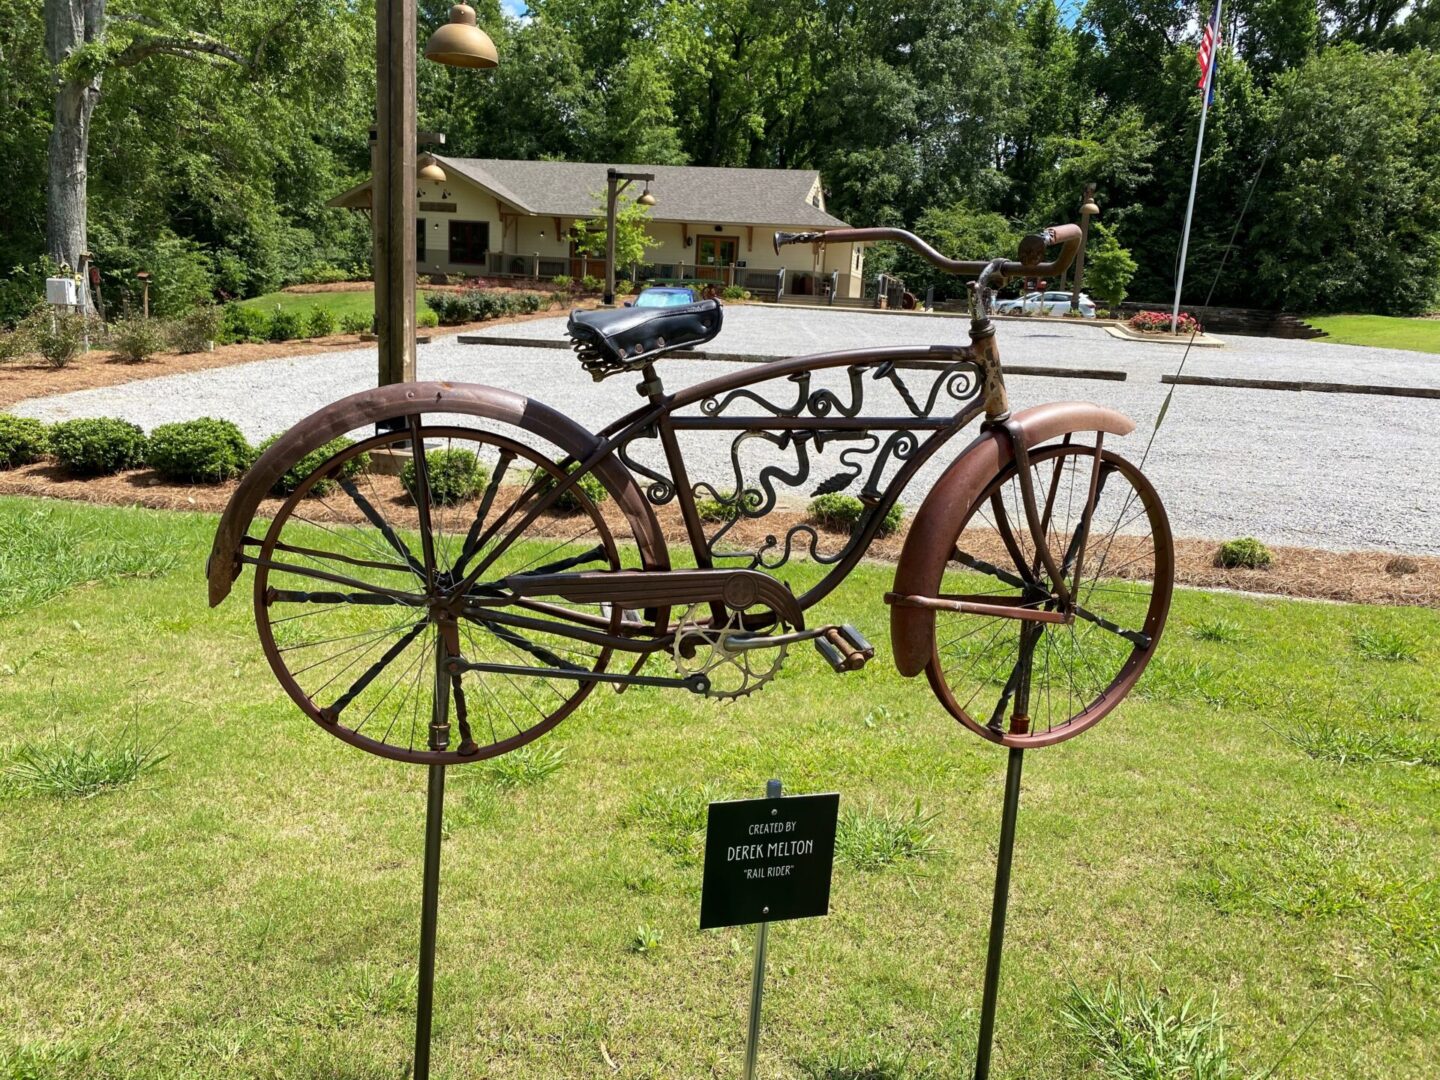 A bicycle sculpture is on display in the grass.